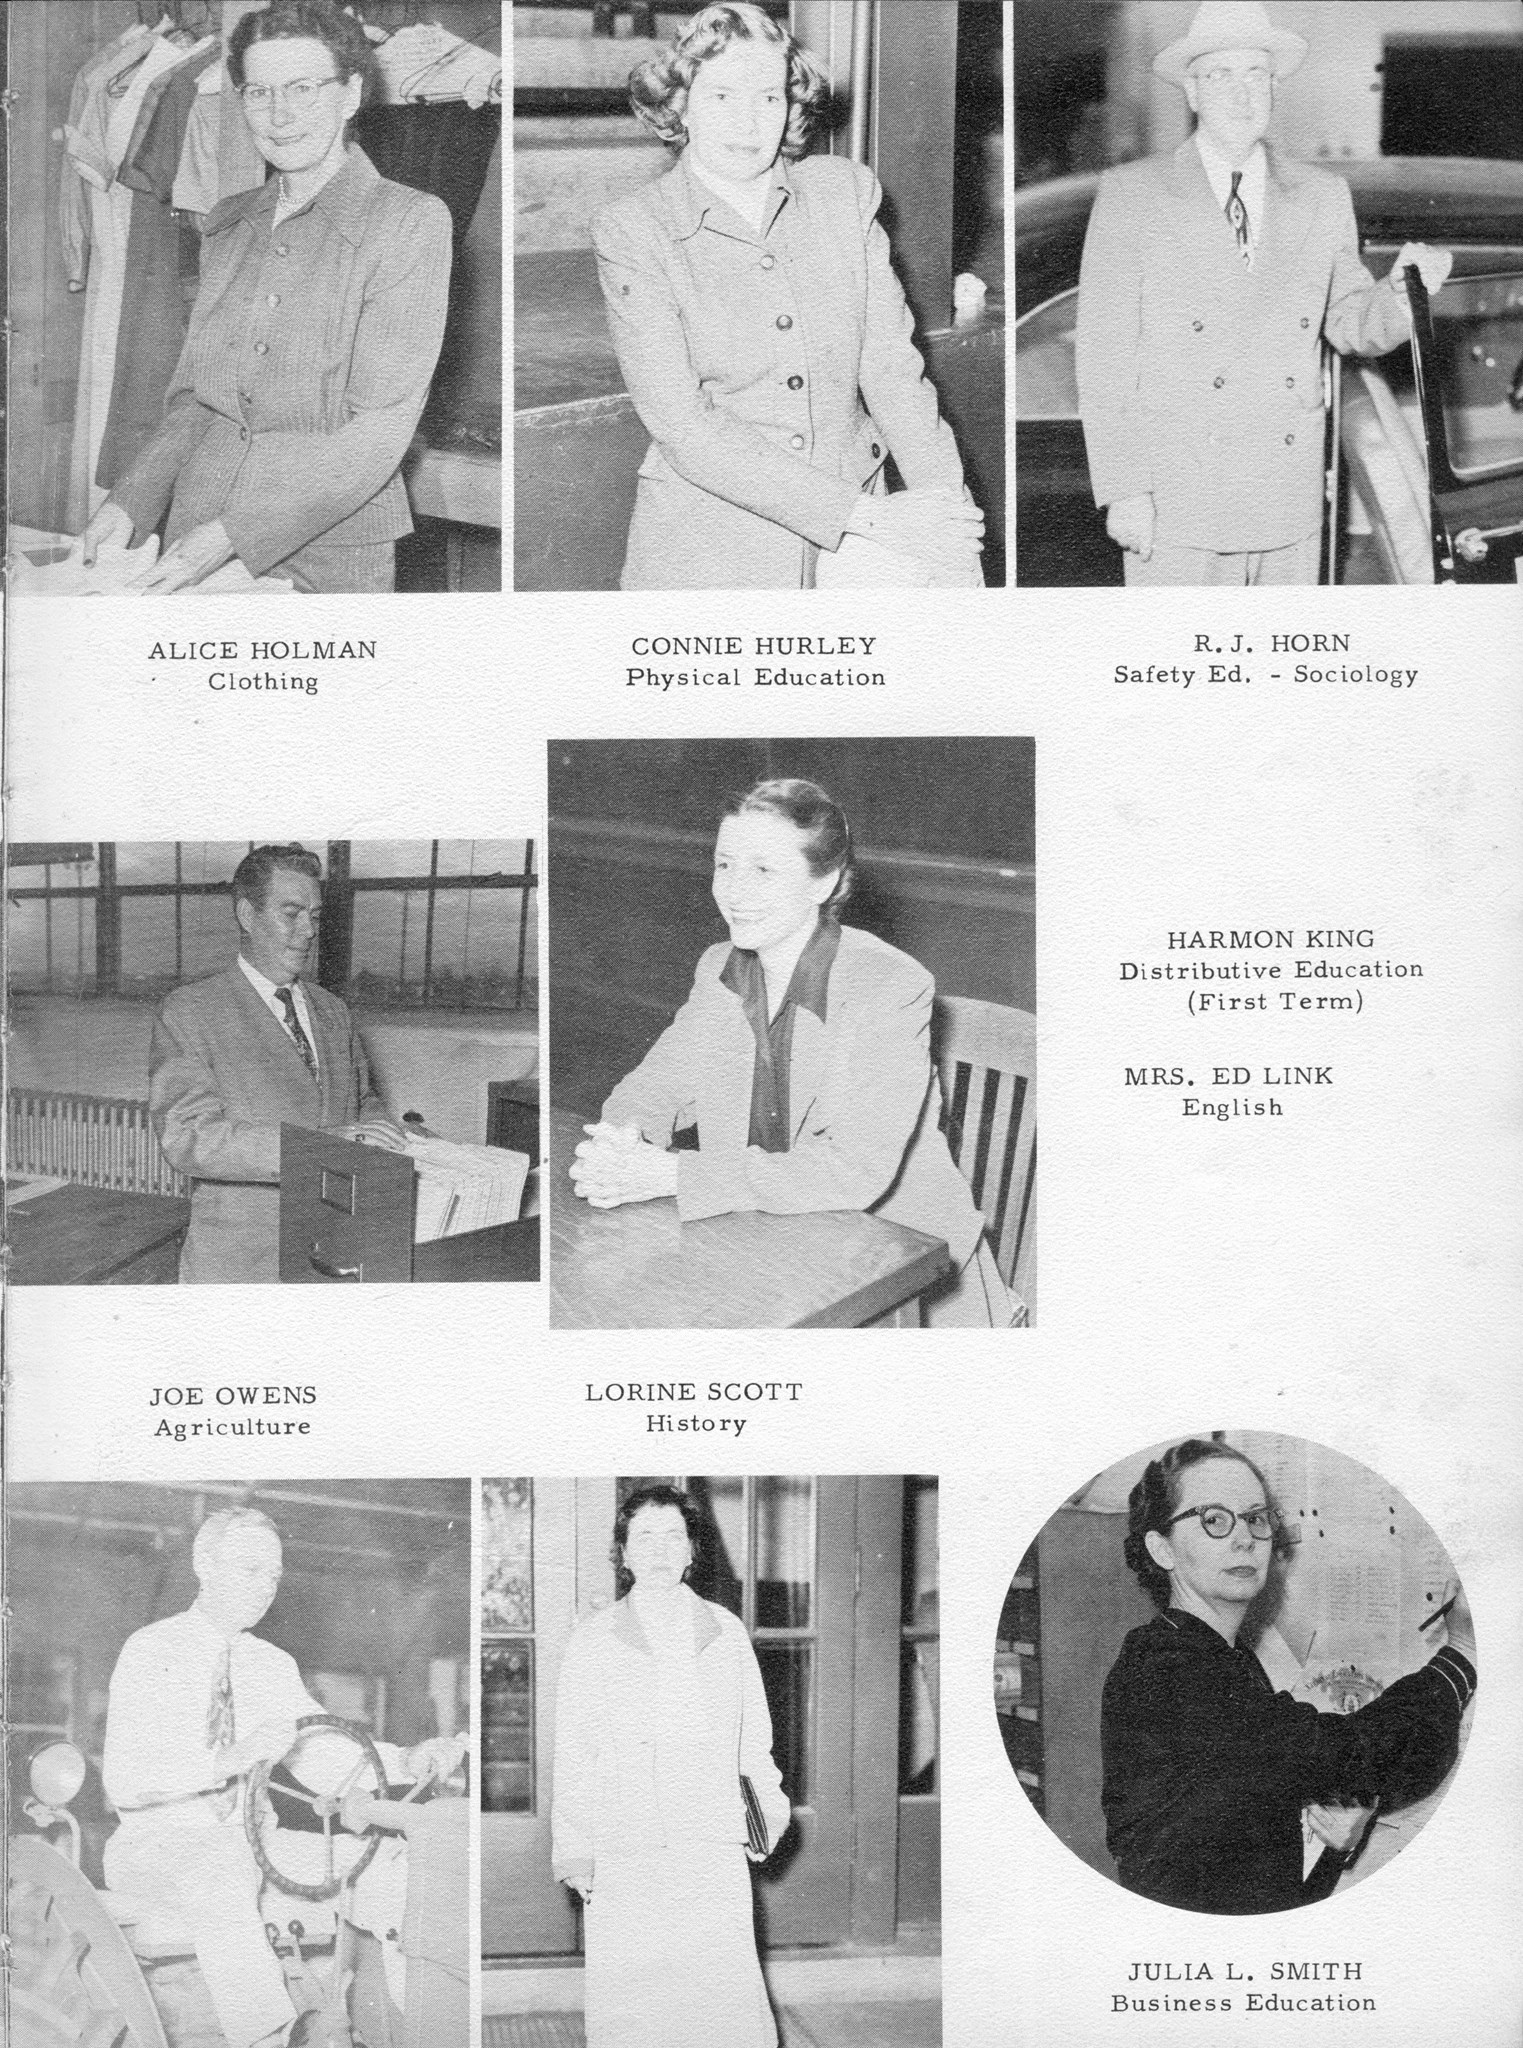 ../../../Images/Large/1952/Arclight-1952-pg0009.jpg